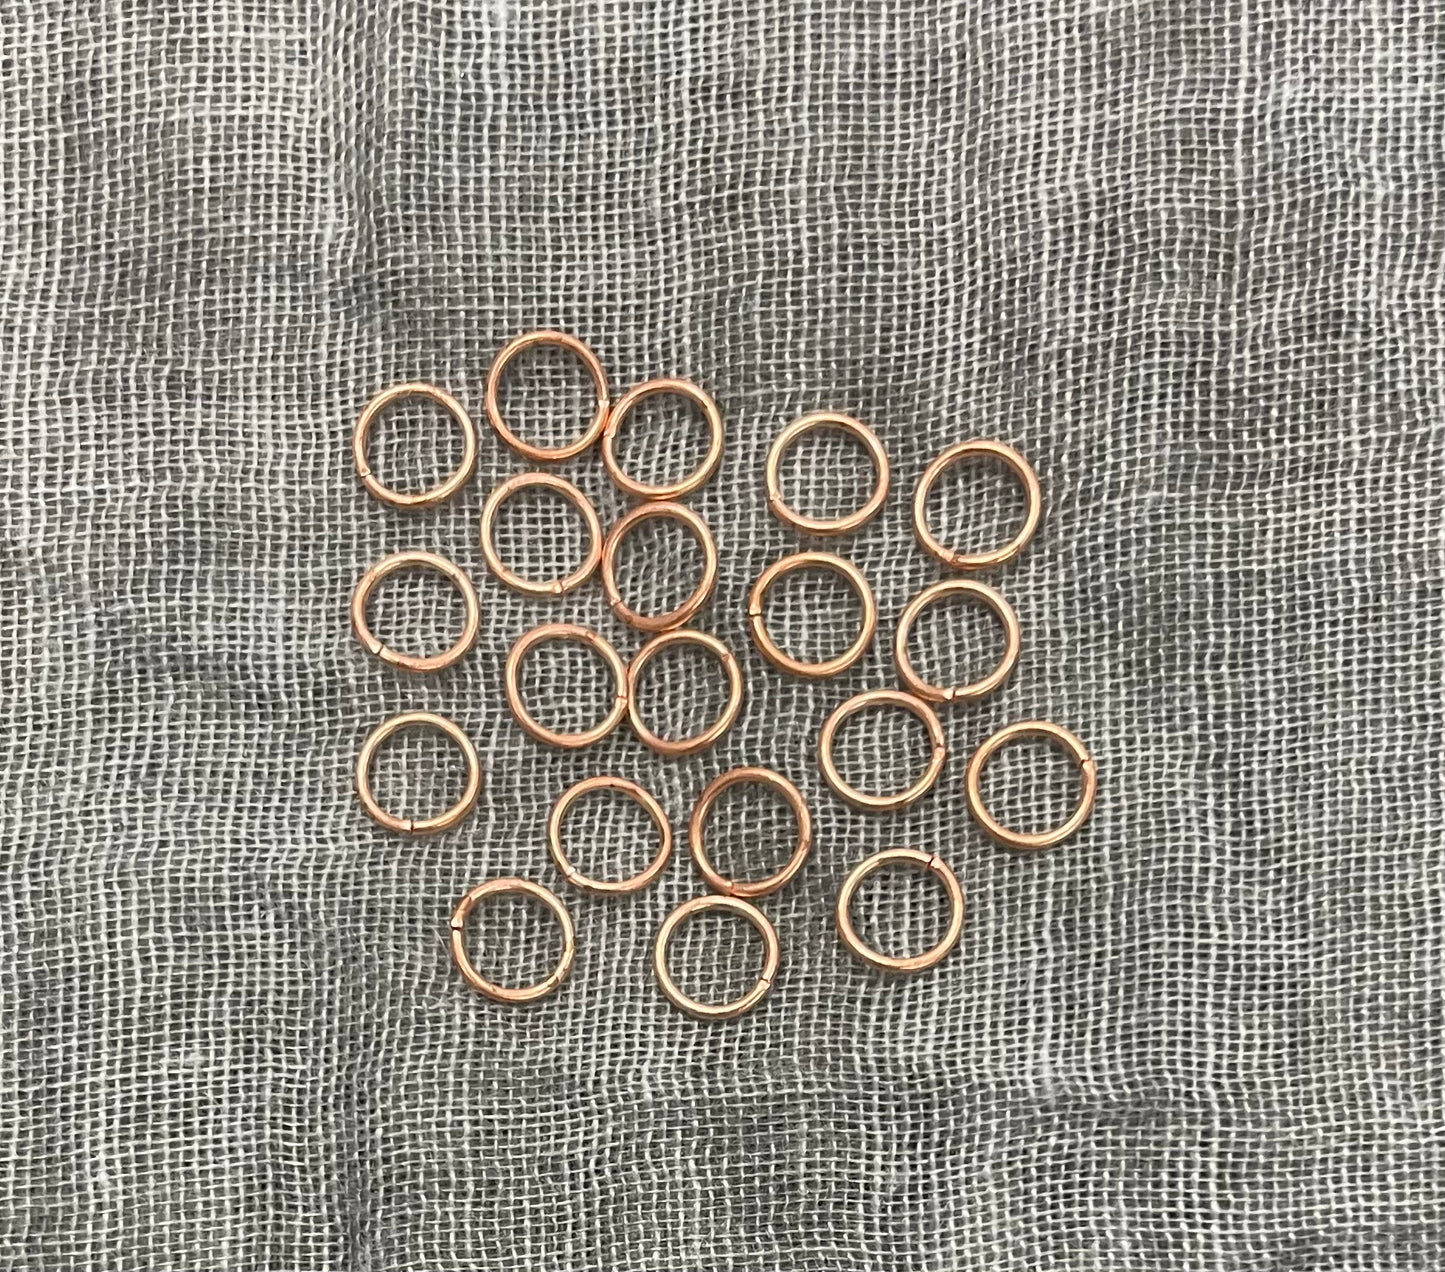 6 mm Open Jump Ring: 21 Gauge, Solid Copper, 20 pieces